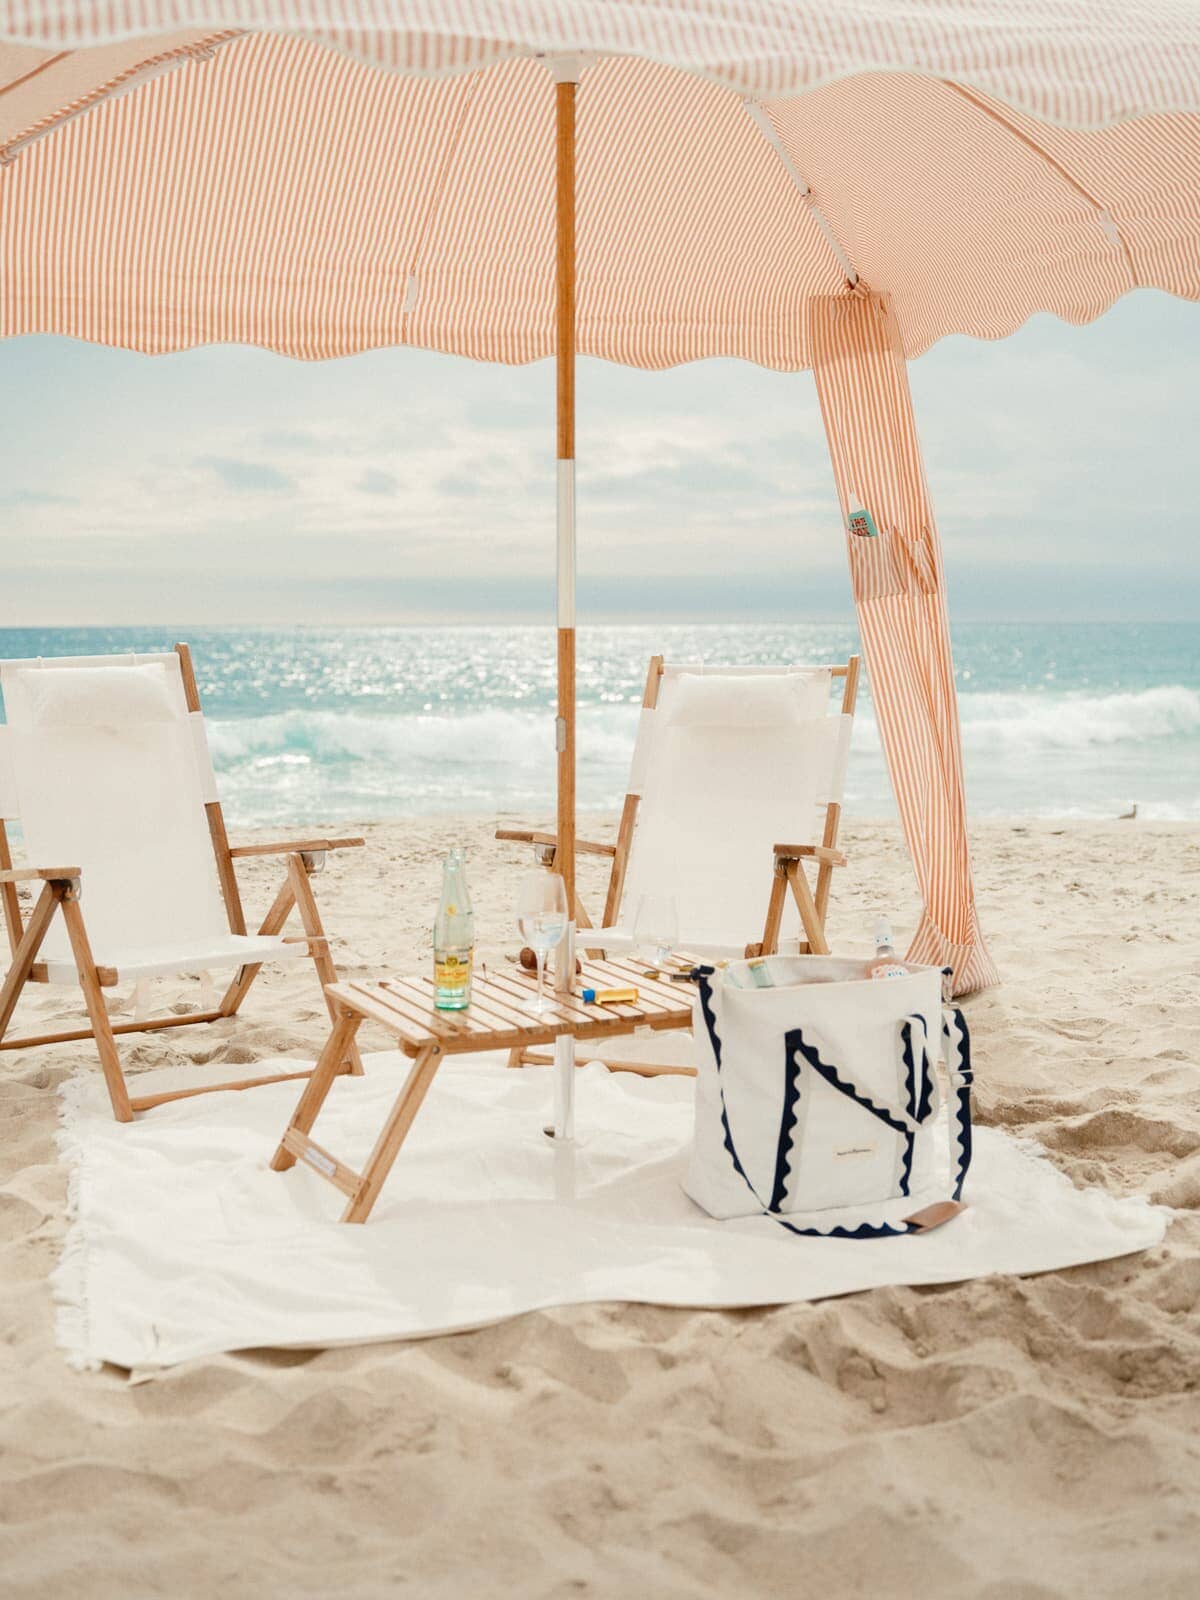 Beach set up with cabana, chairs and accessories